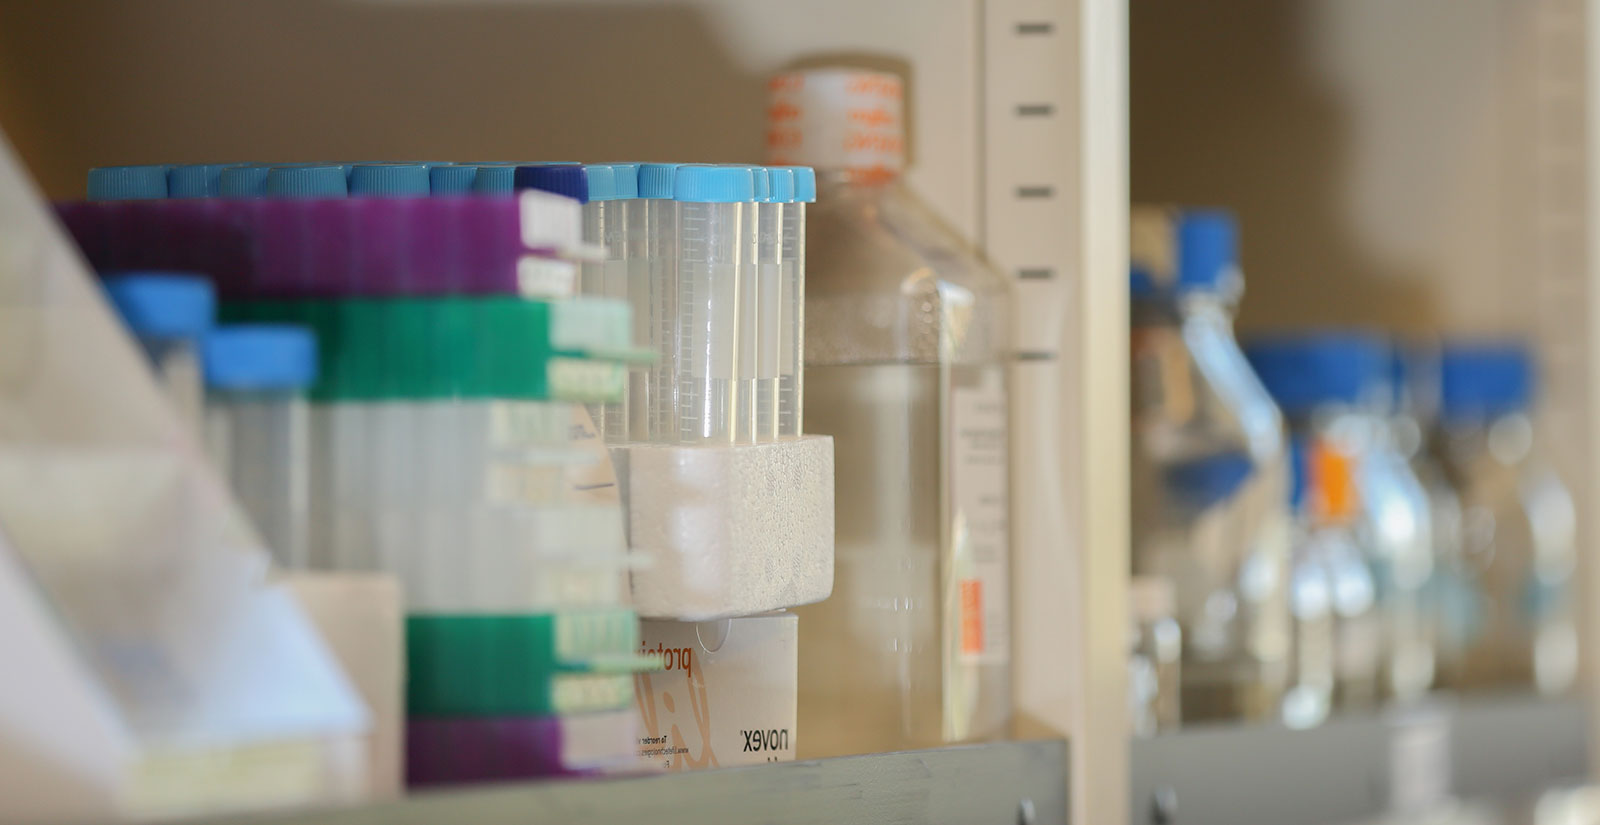 A close-up image of laboratory equipment depicts test tubes, boxes and bottles on the shelf in a Penn State College of Medicine laboratory in summer 2016. Test tubes and one bottle are visible at left in focus, with other bottles out-of-focus to the right.